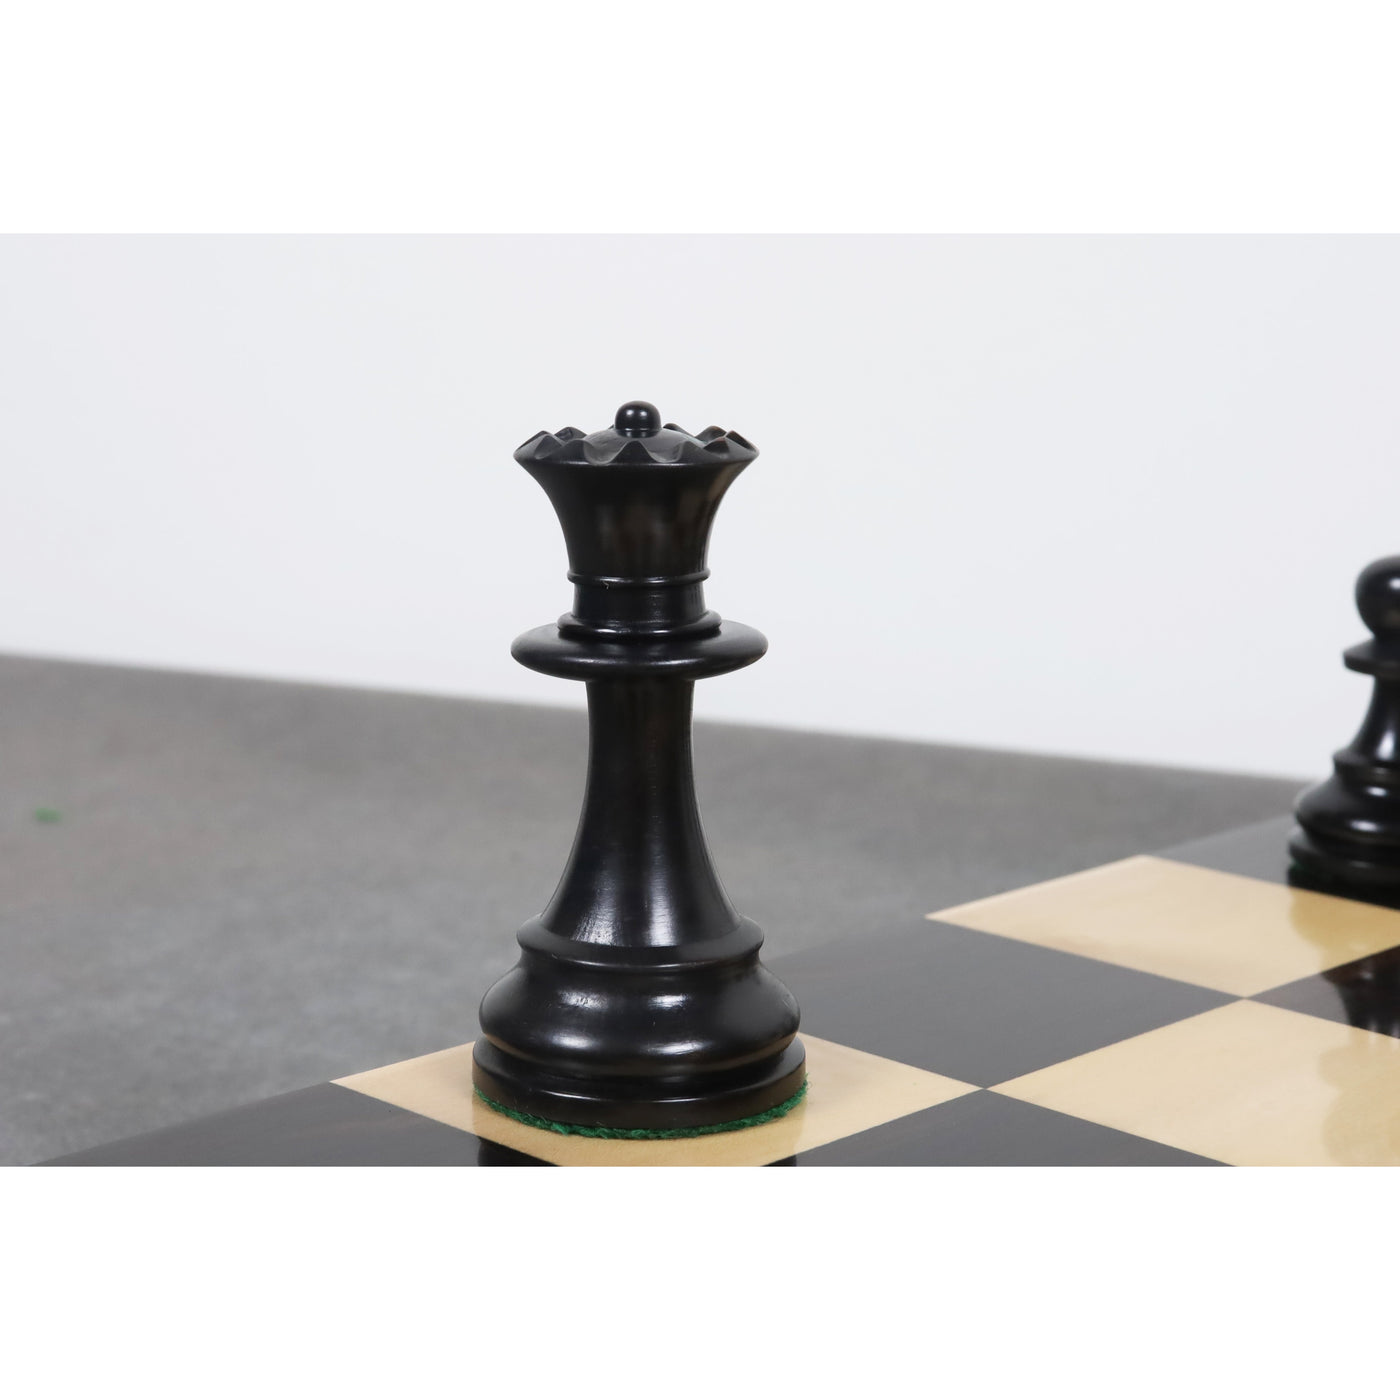 Slightly Imperfect 3.9" French Chavet Tournament Chess Set - Chess Pieces Only - Antiqued Boxwood